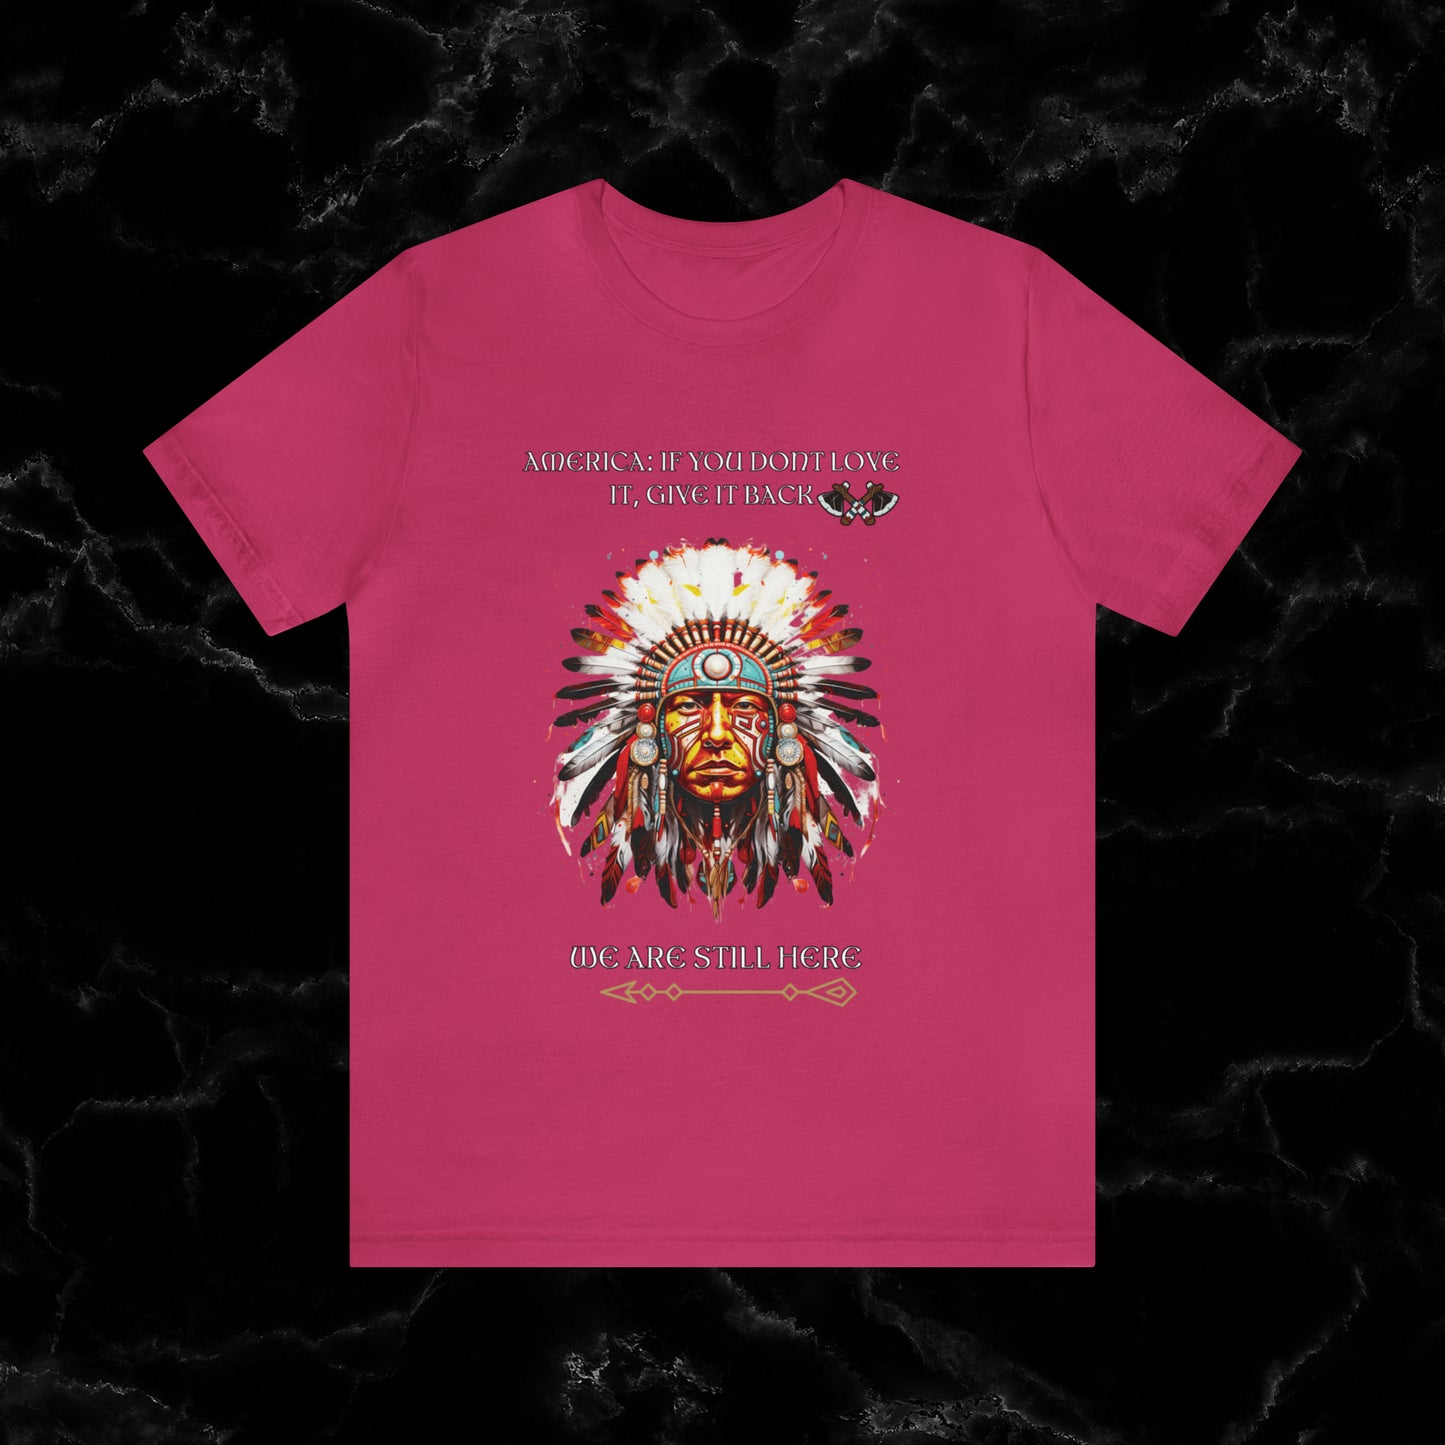 America Love it Or Give It Back Vintage T-Shirt - Indigenous Native Shirt T-Shirt Berry S 